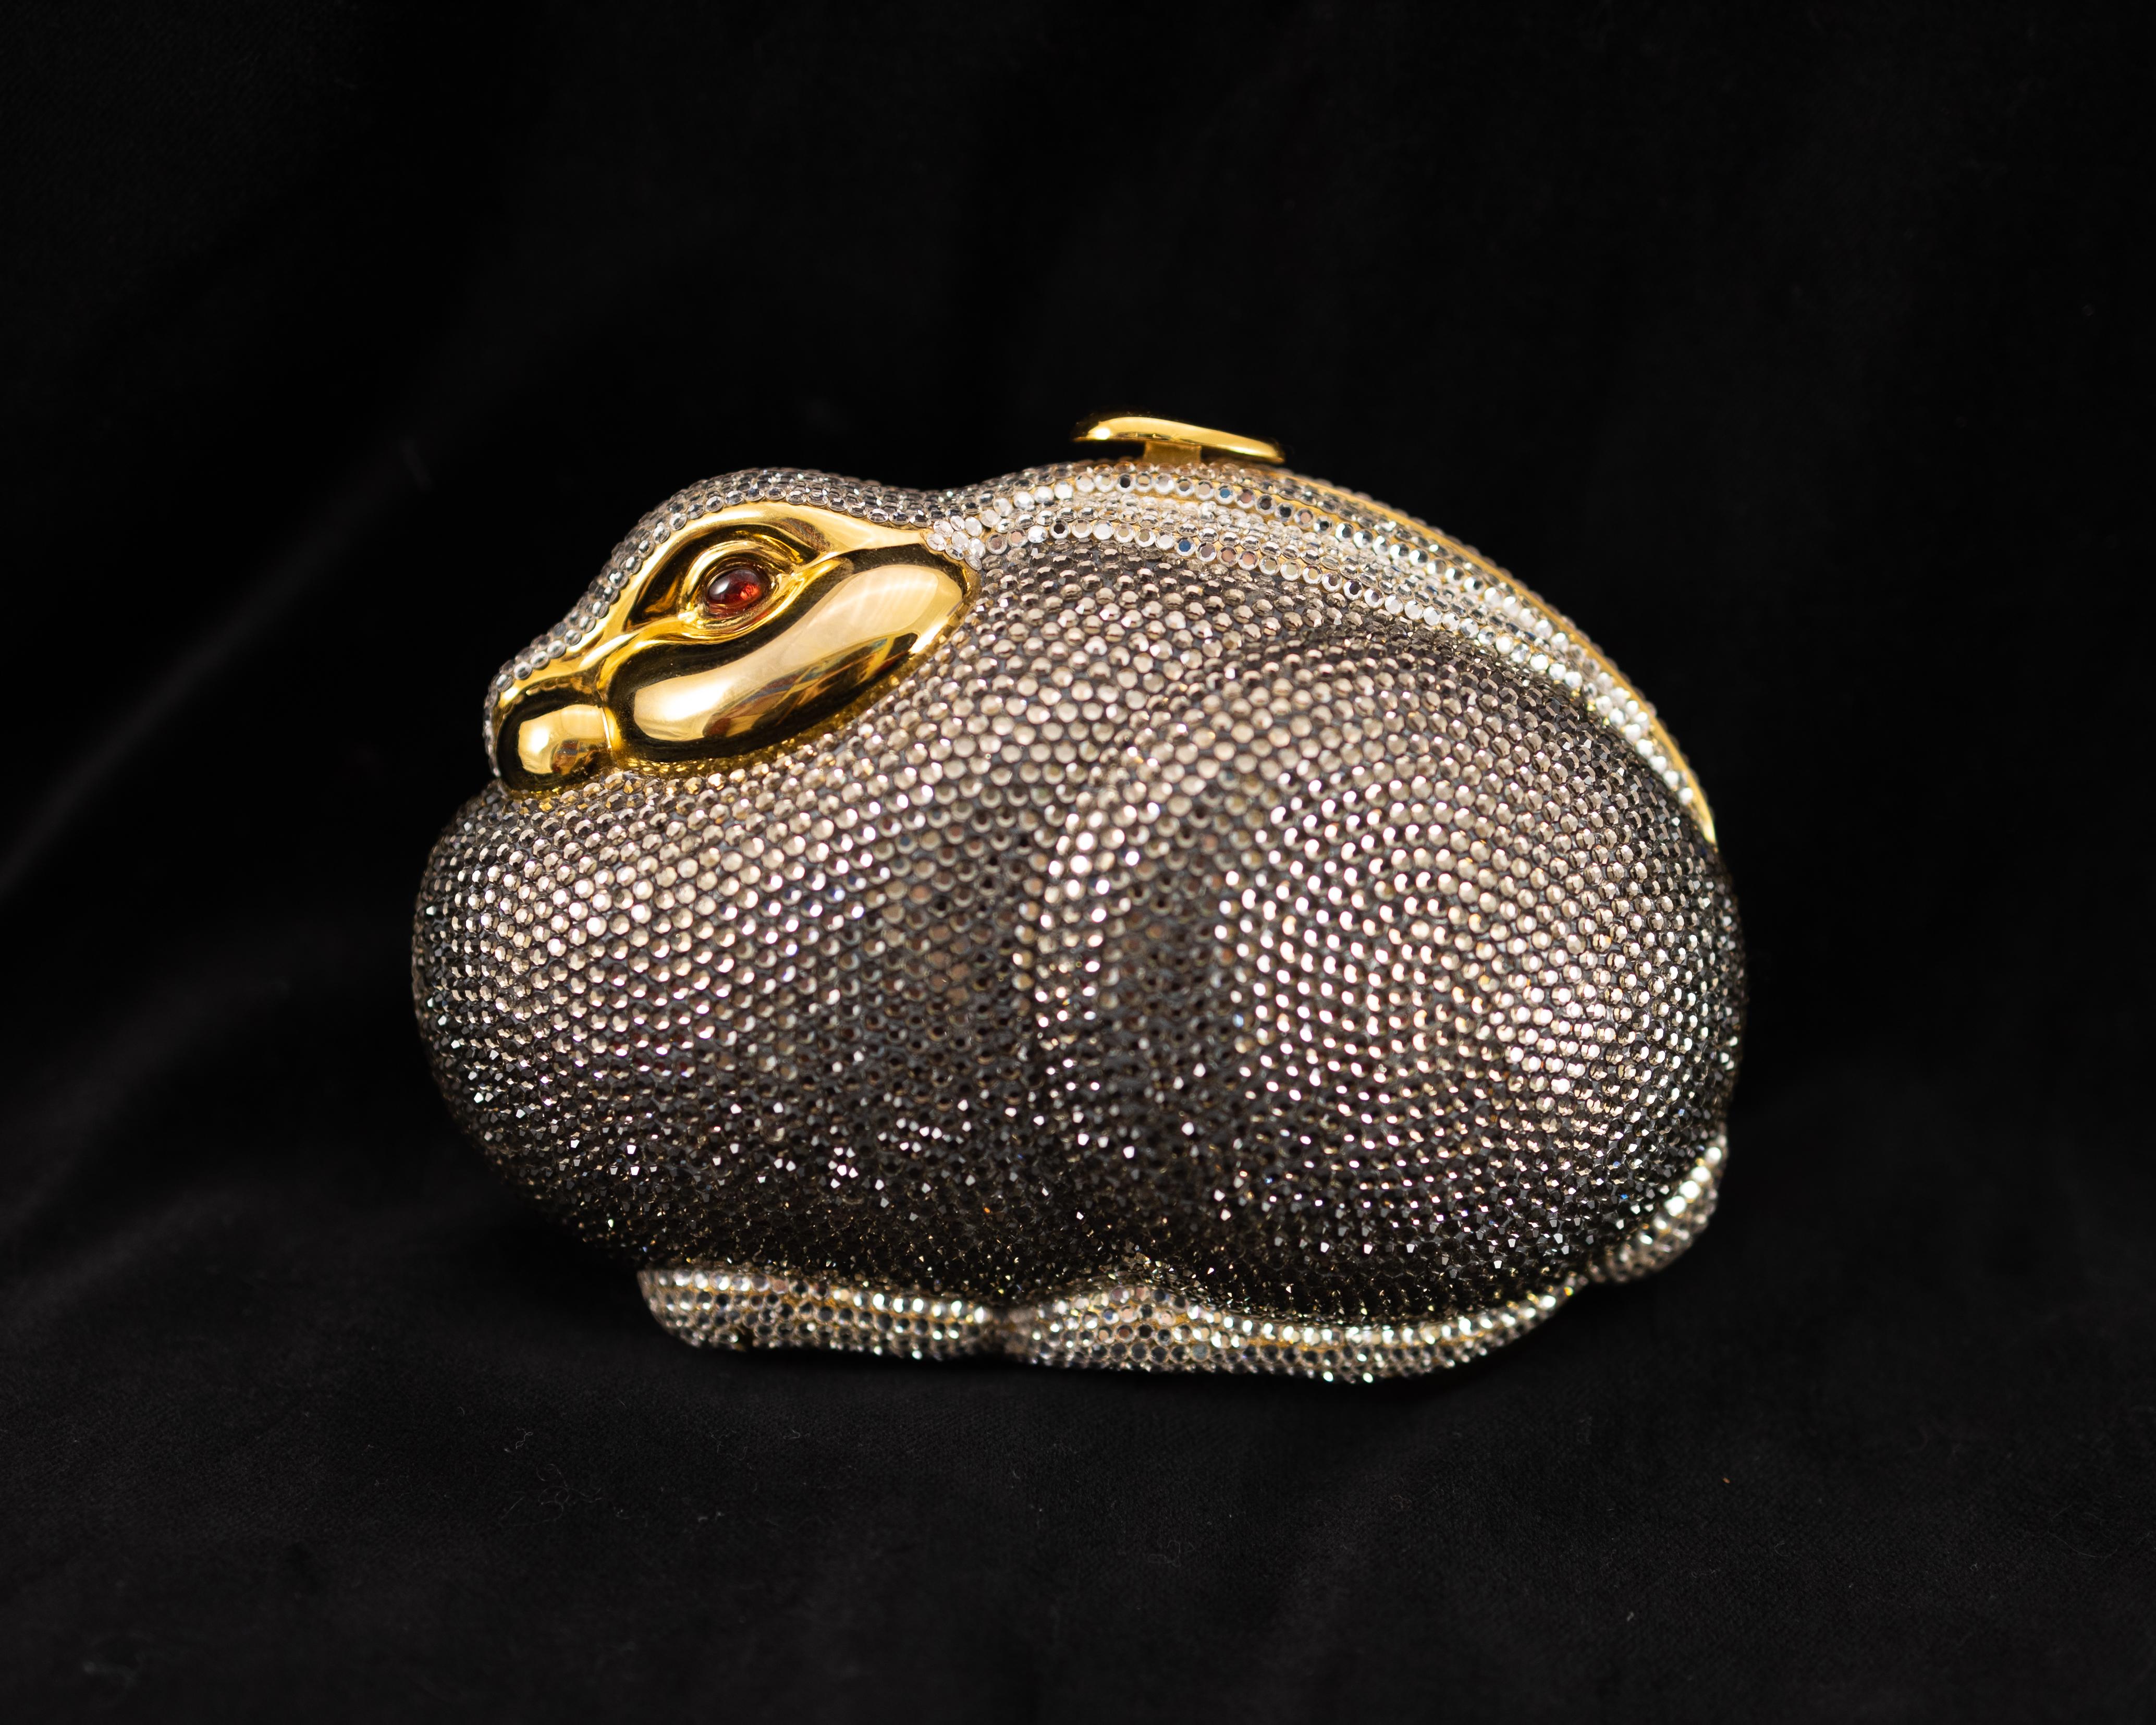 Silver and Gray Swarovski Crystal Bunny Rabbit Minaudiere - Sculpture by Judith Leiber